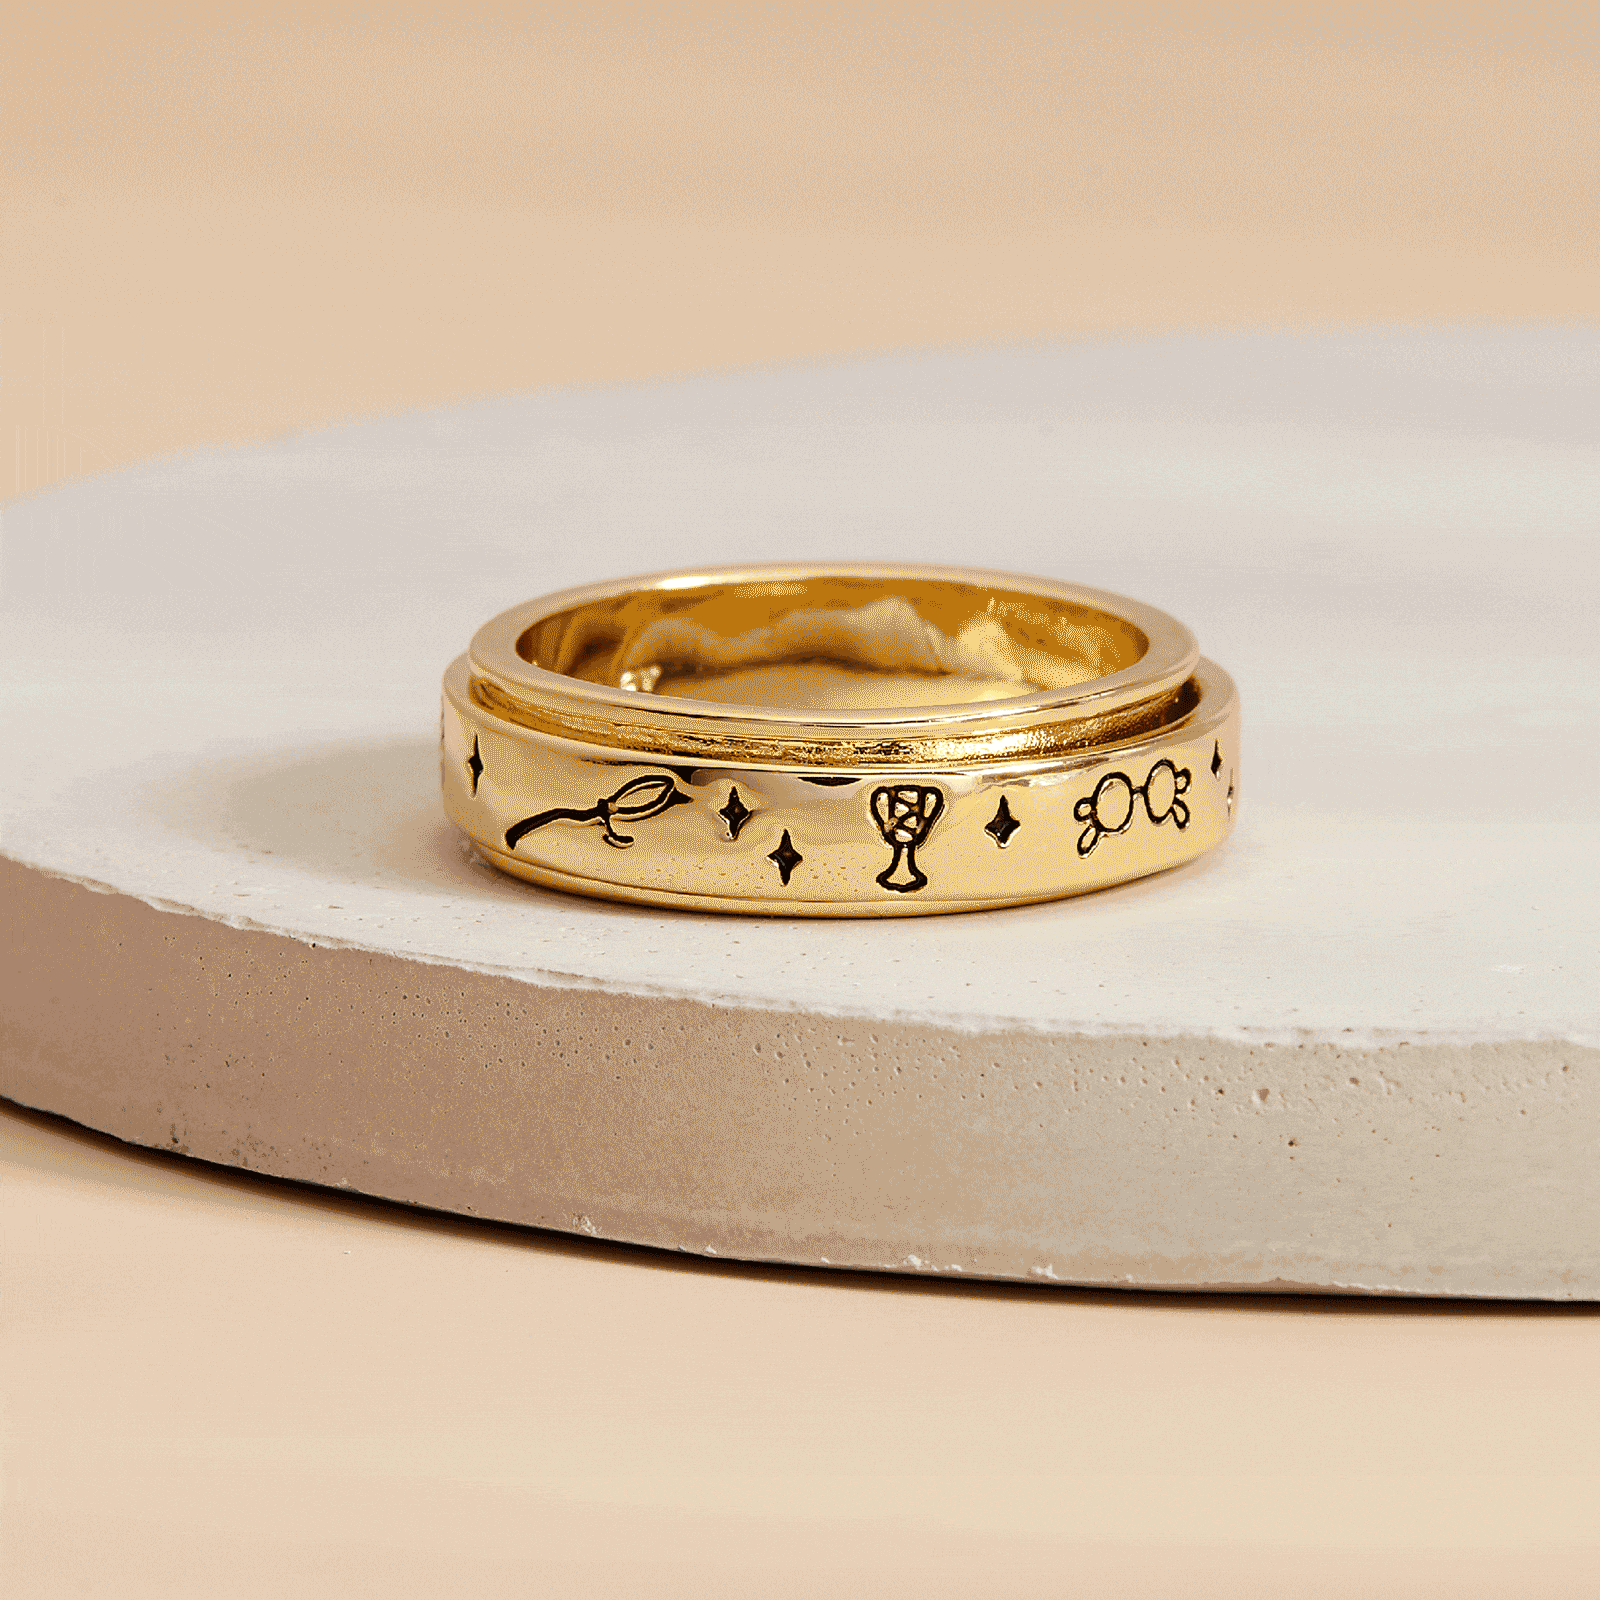 Couples' Rings, Commitment Rings, Promise Rings | Tiffany & Co.